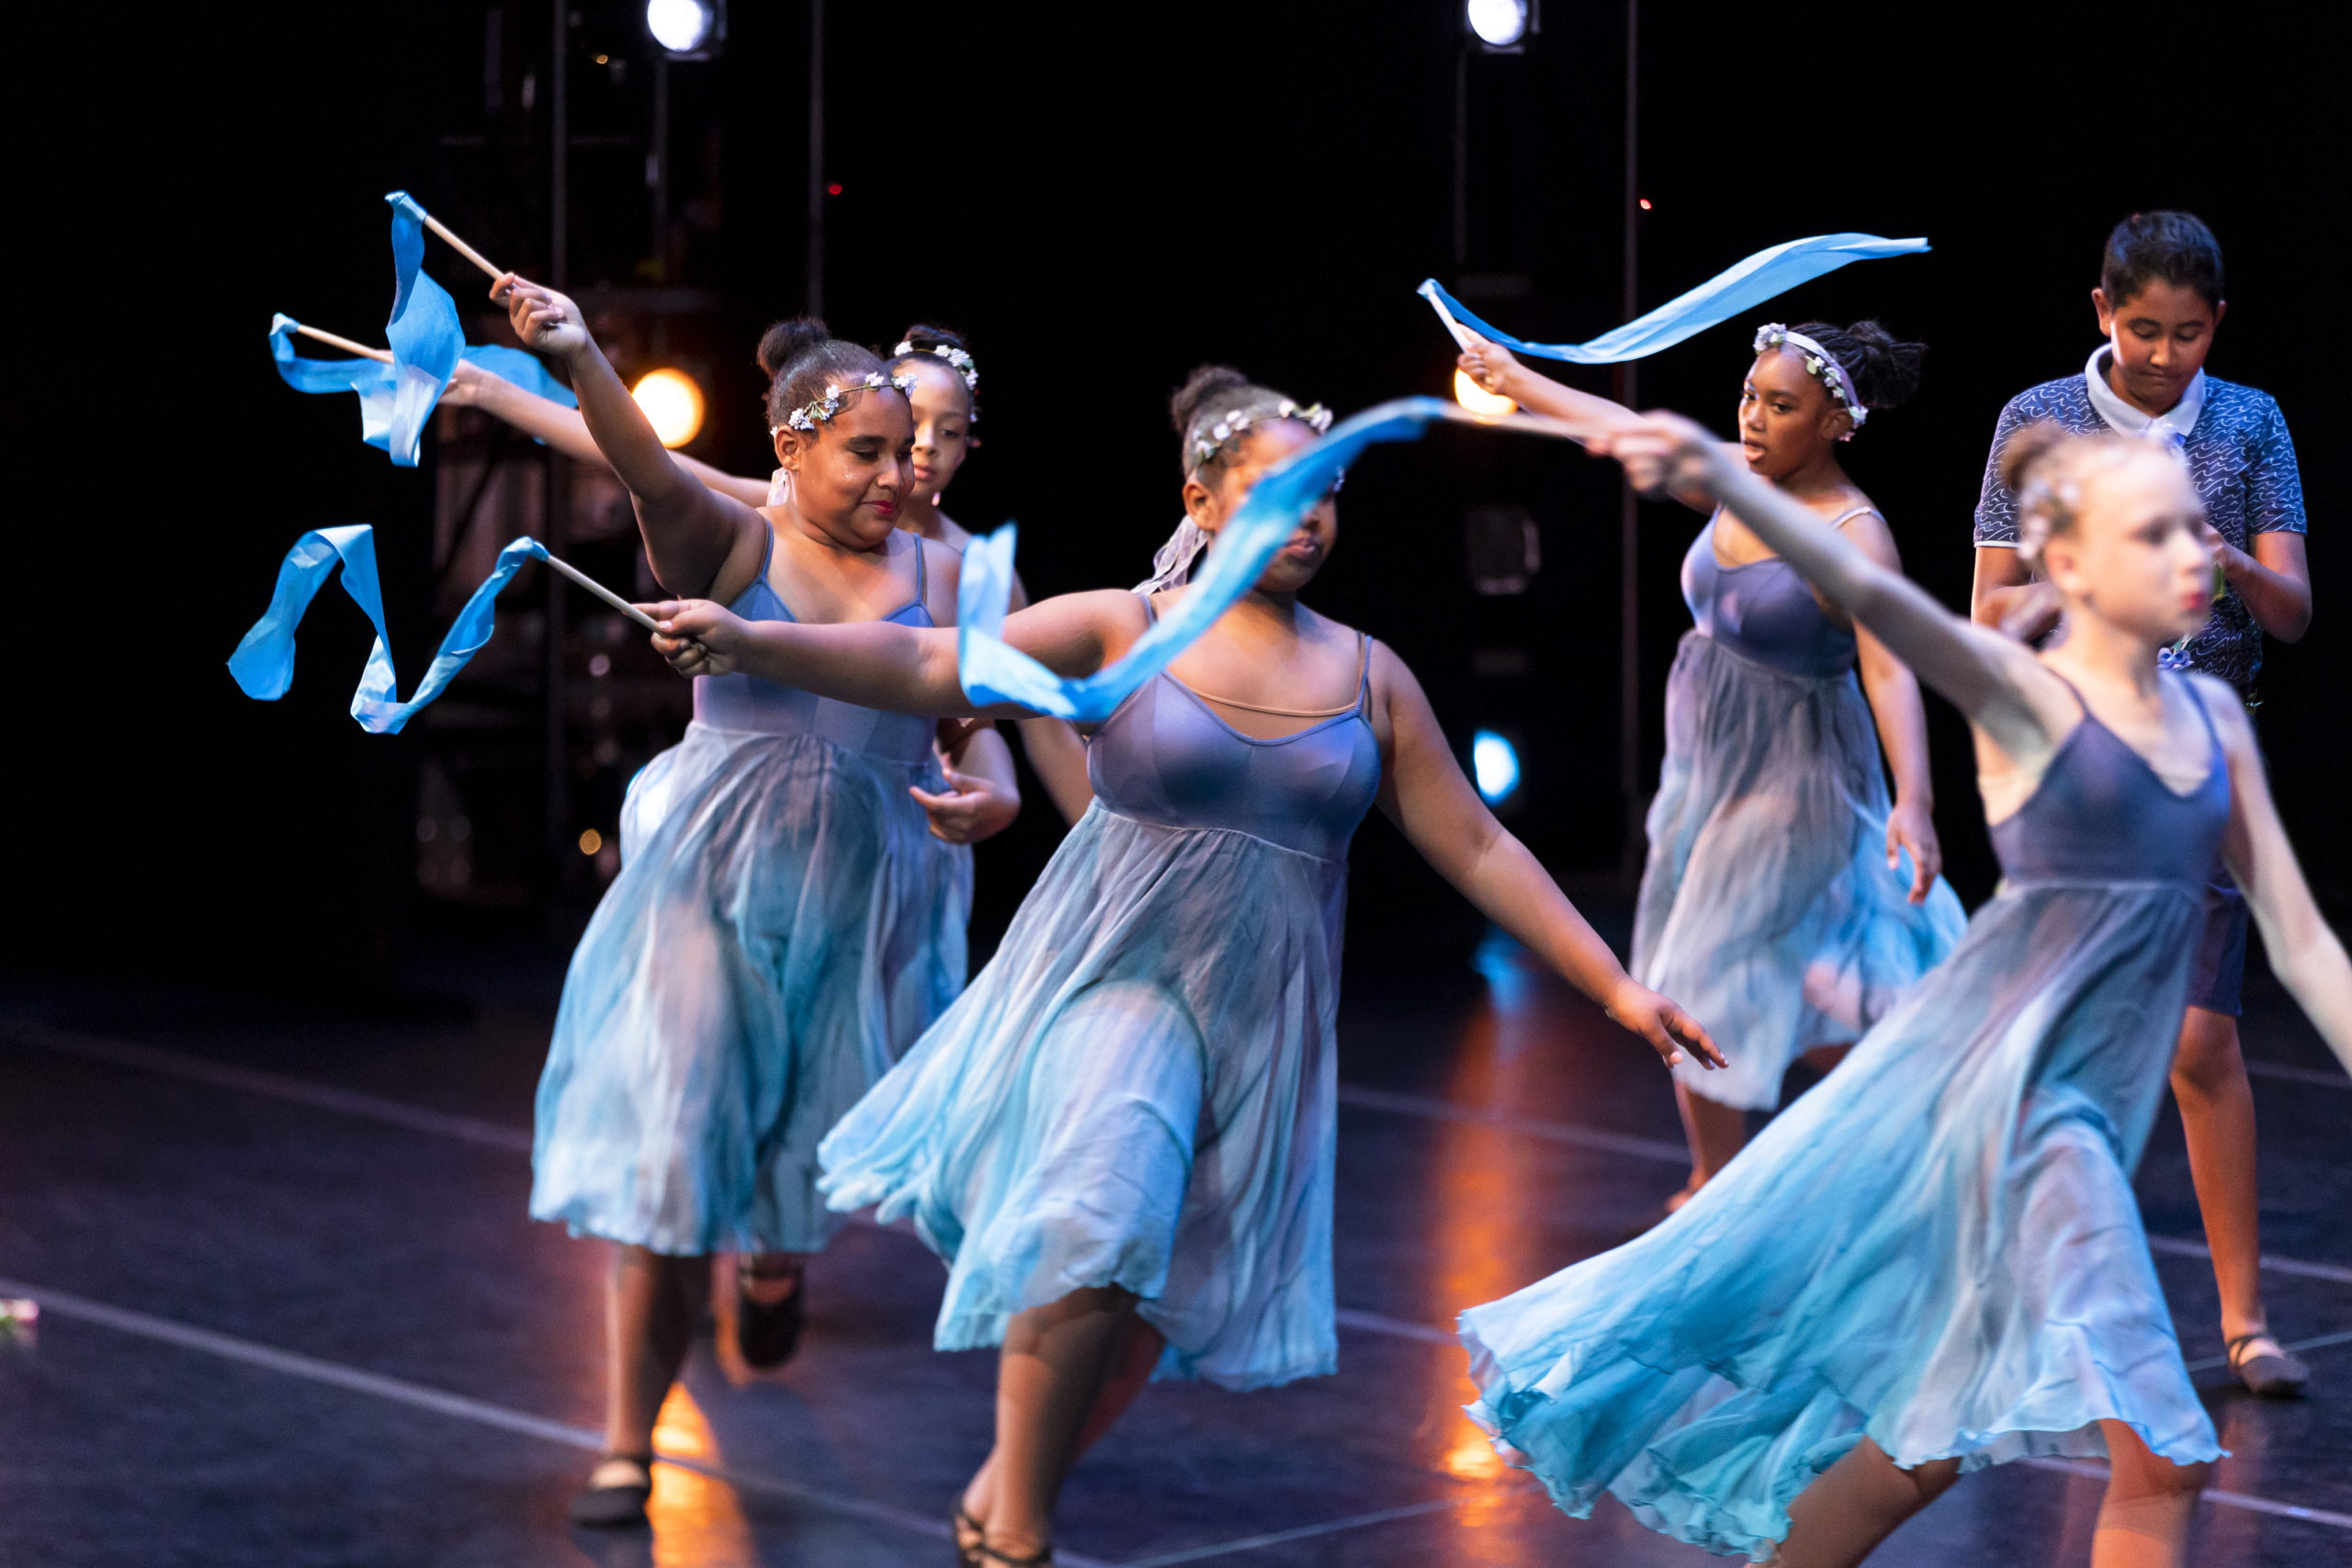 dancers in blue dresses dance with blue ribbons on stage